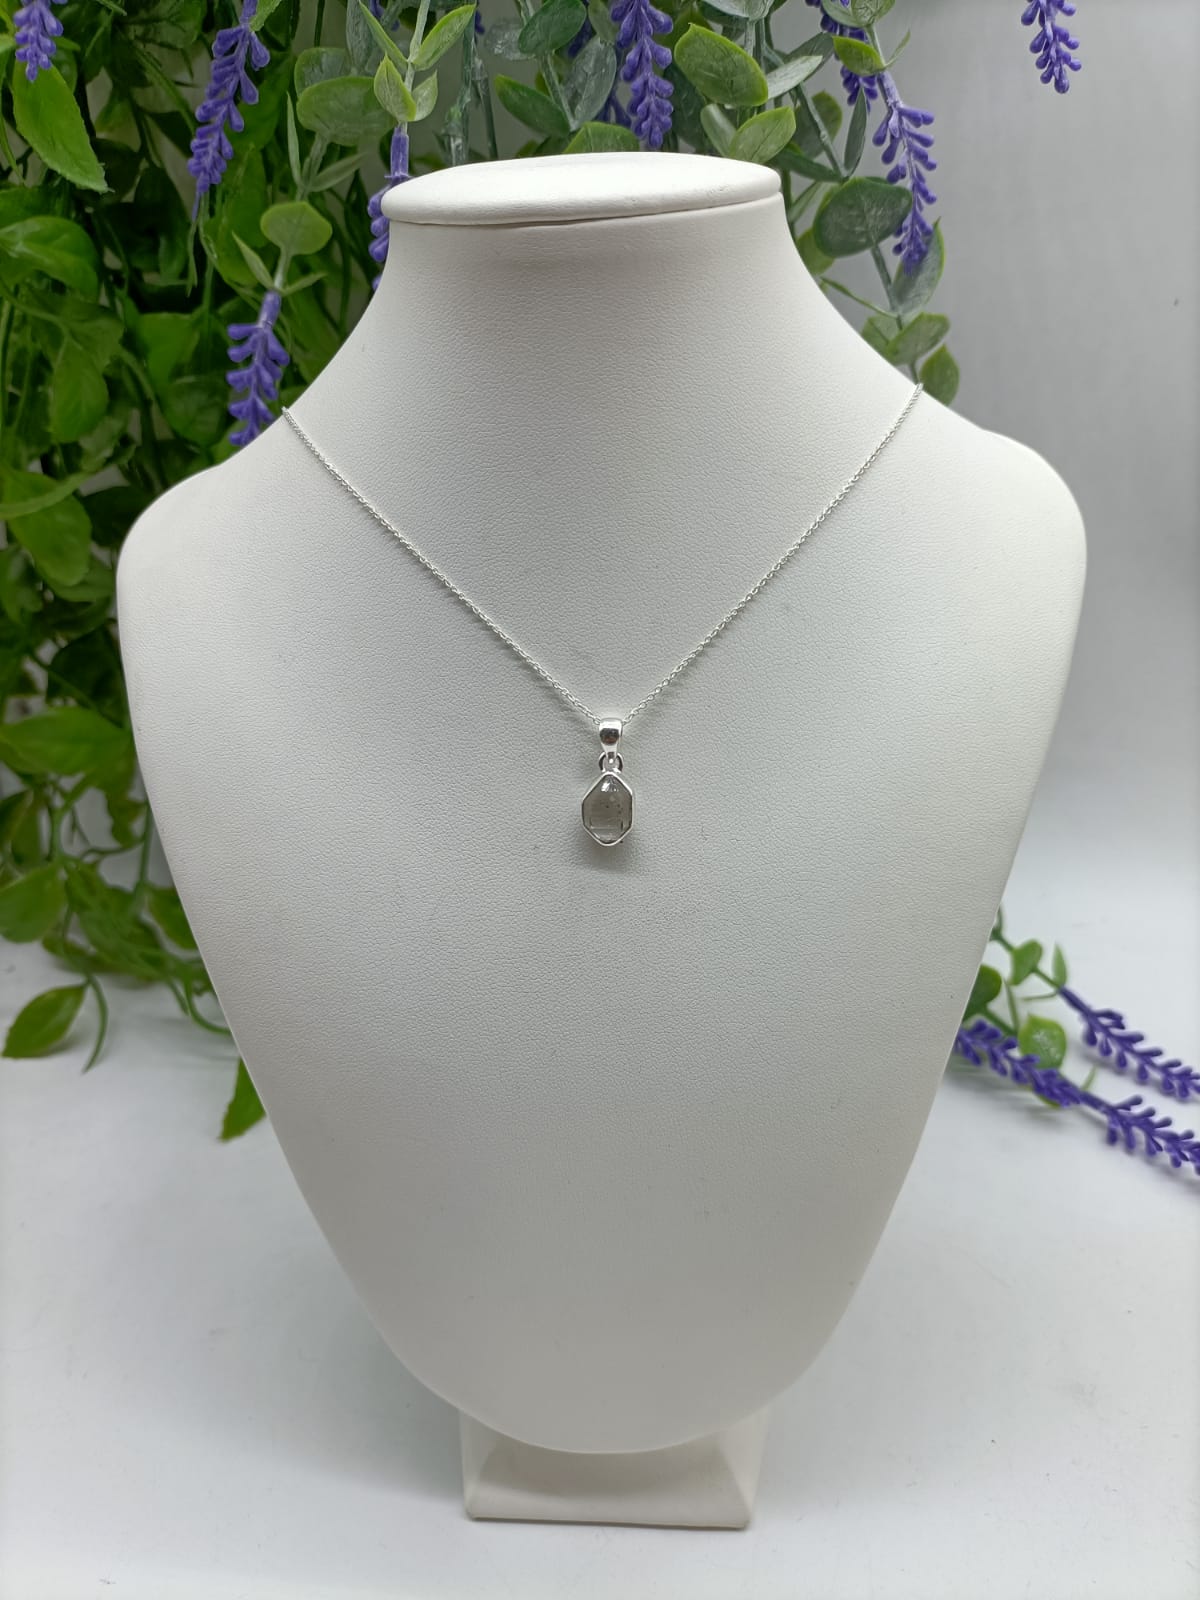 Genuine Herkimer Diamond 925 Sterling Silver Pendant - Silver chain included Crystal Wellness